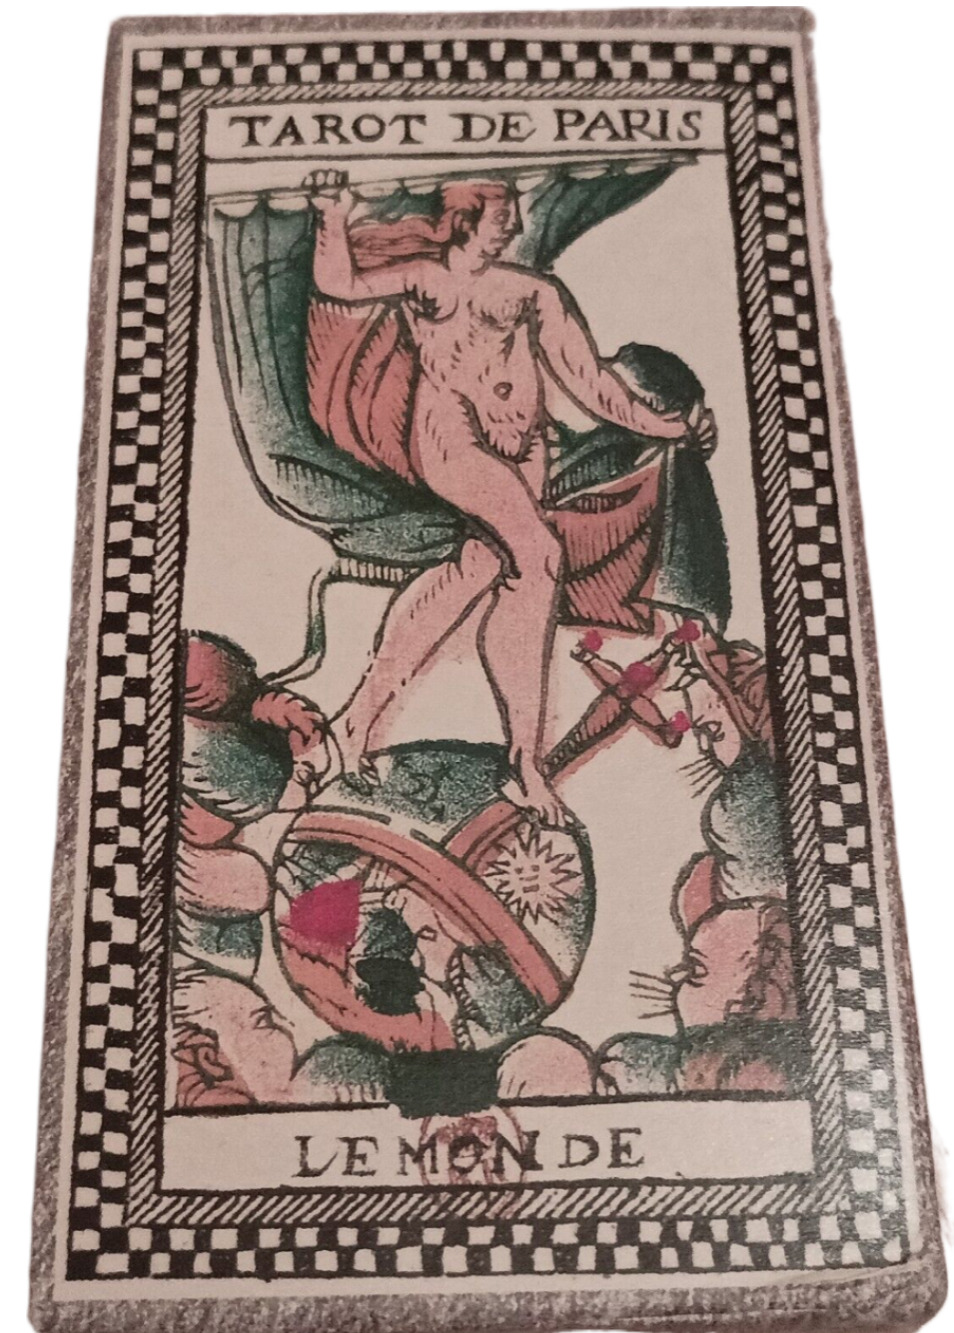 The Tarot of Paris, by André Dimanche, Edited by Grimaud France, 1984